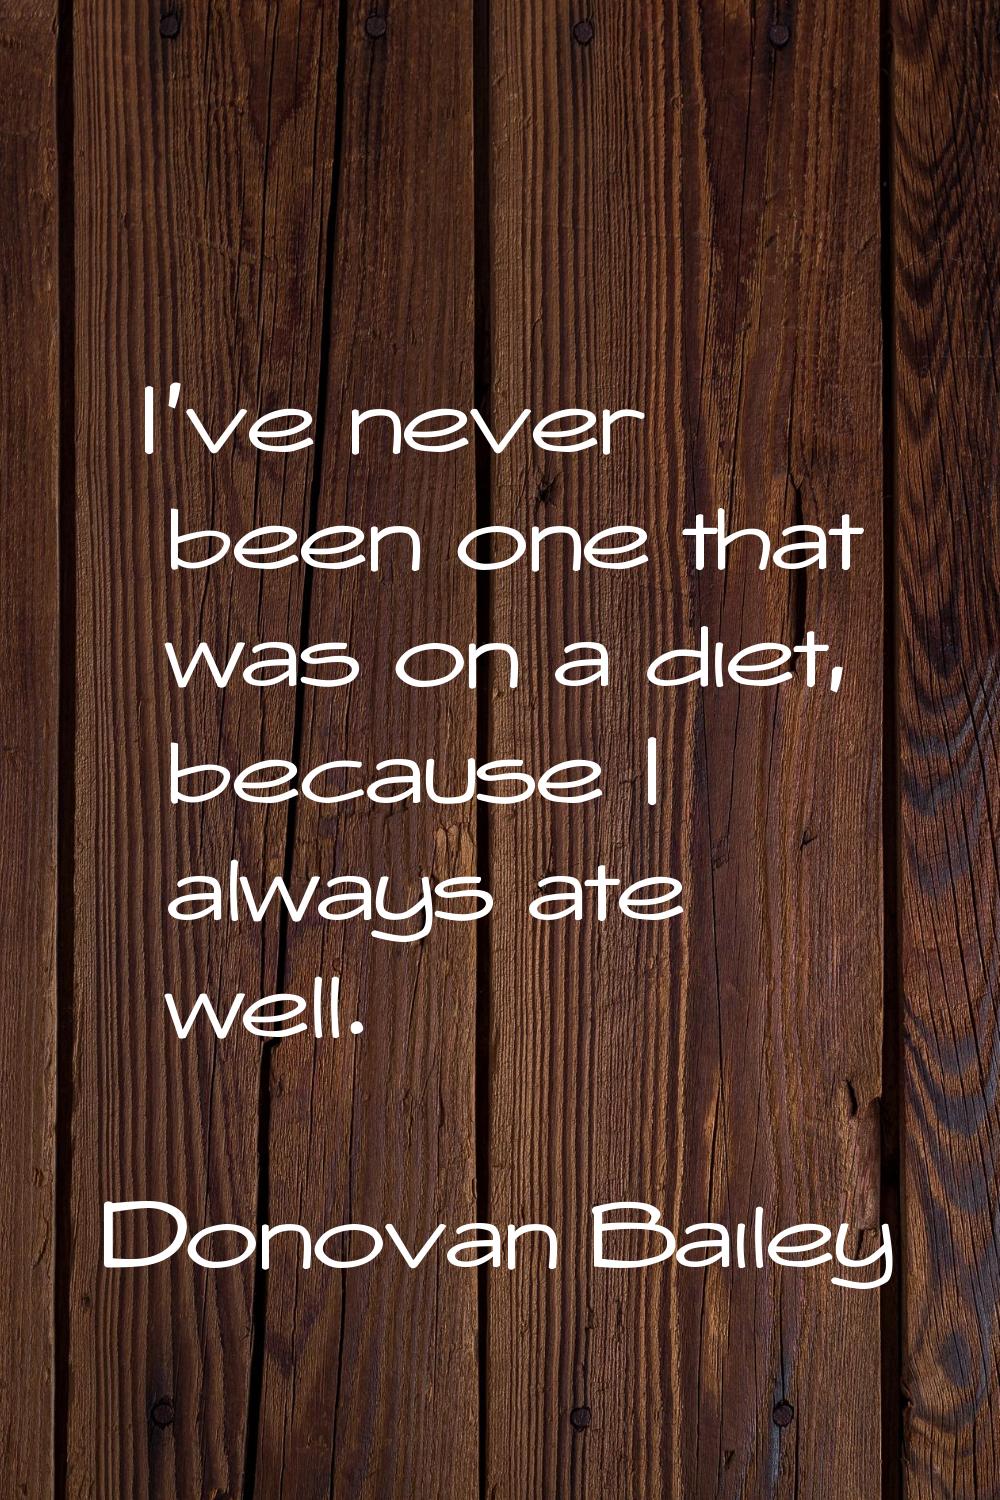 I've never been one that was on a diet, because I always ate well.